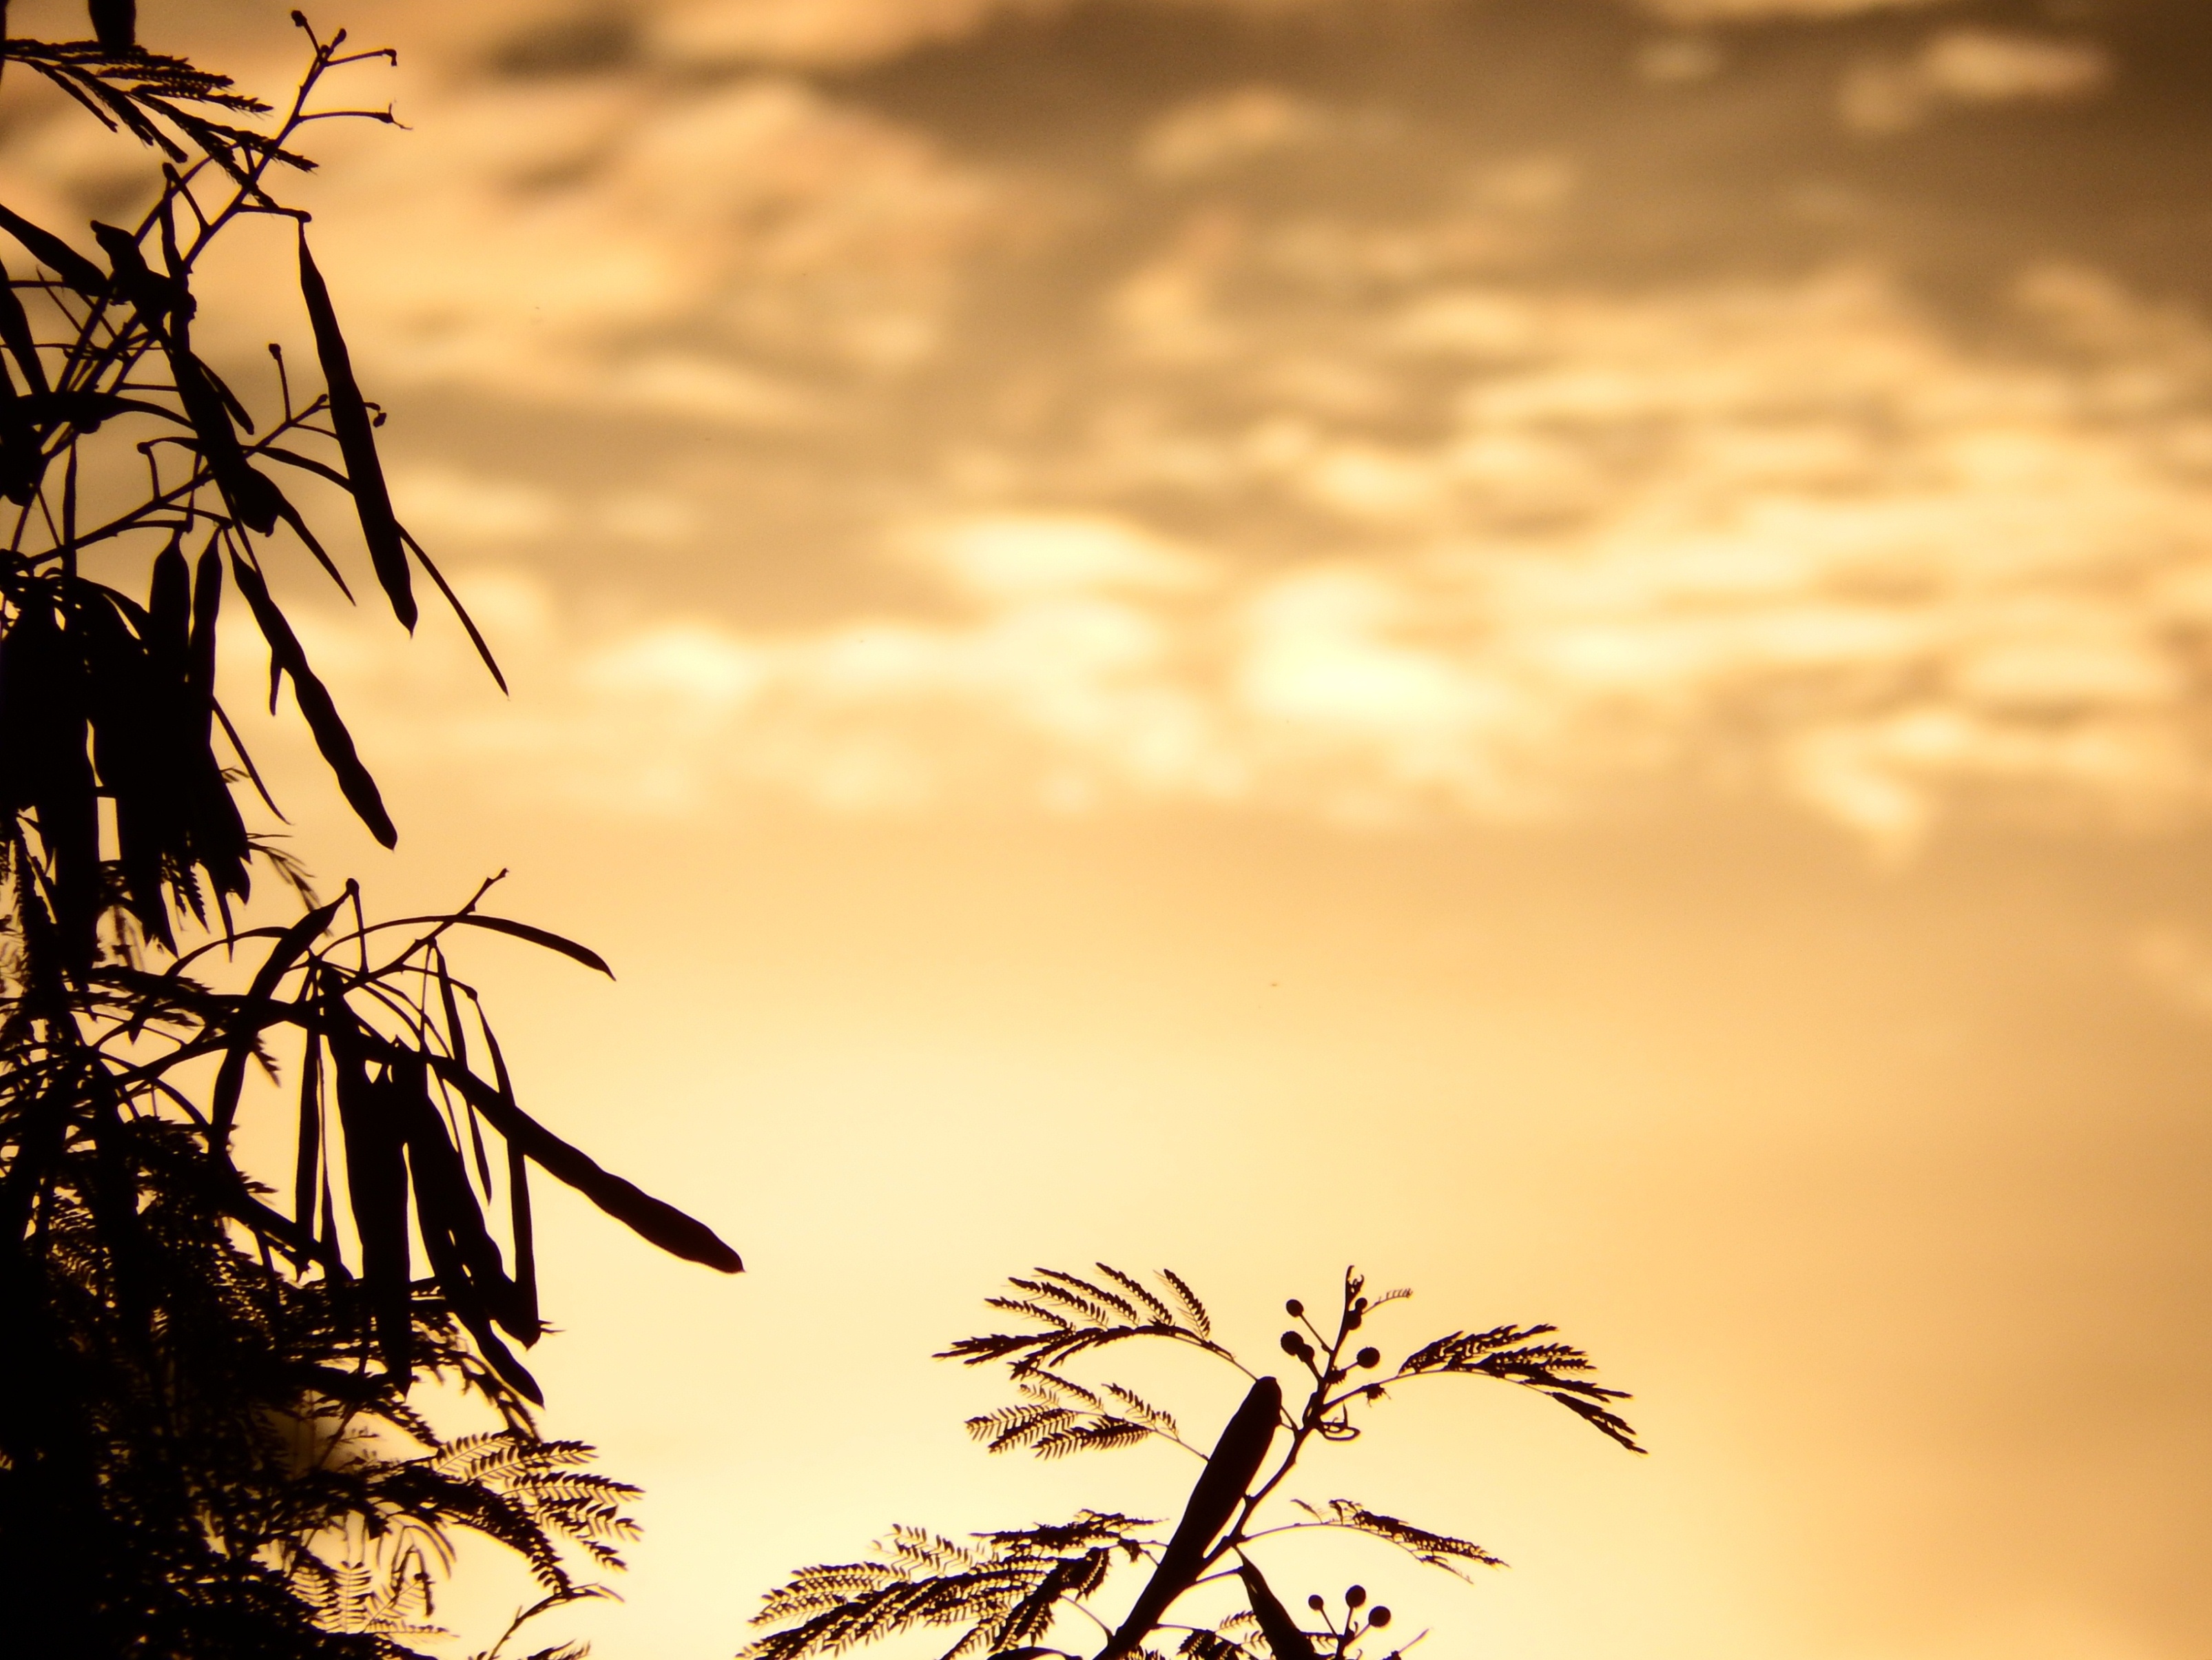 Tropical trees silhouette at sunset photo